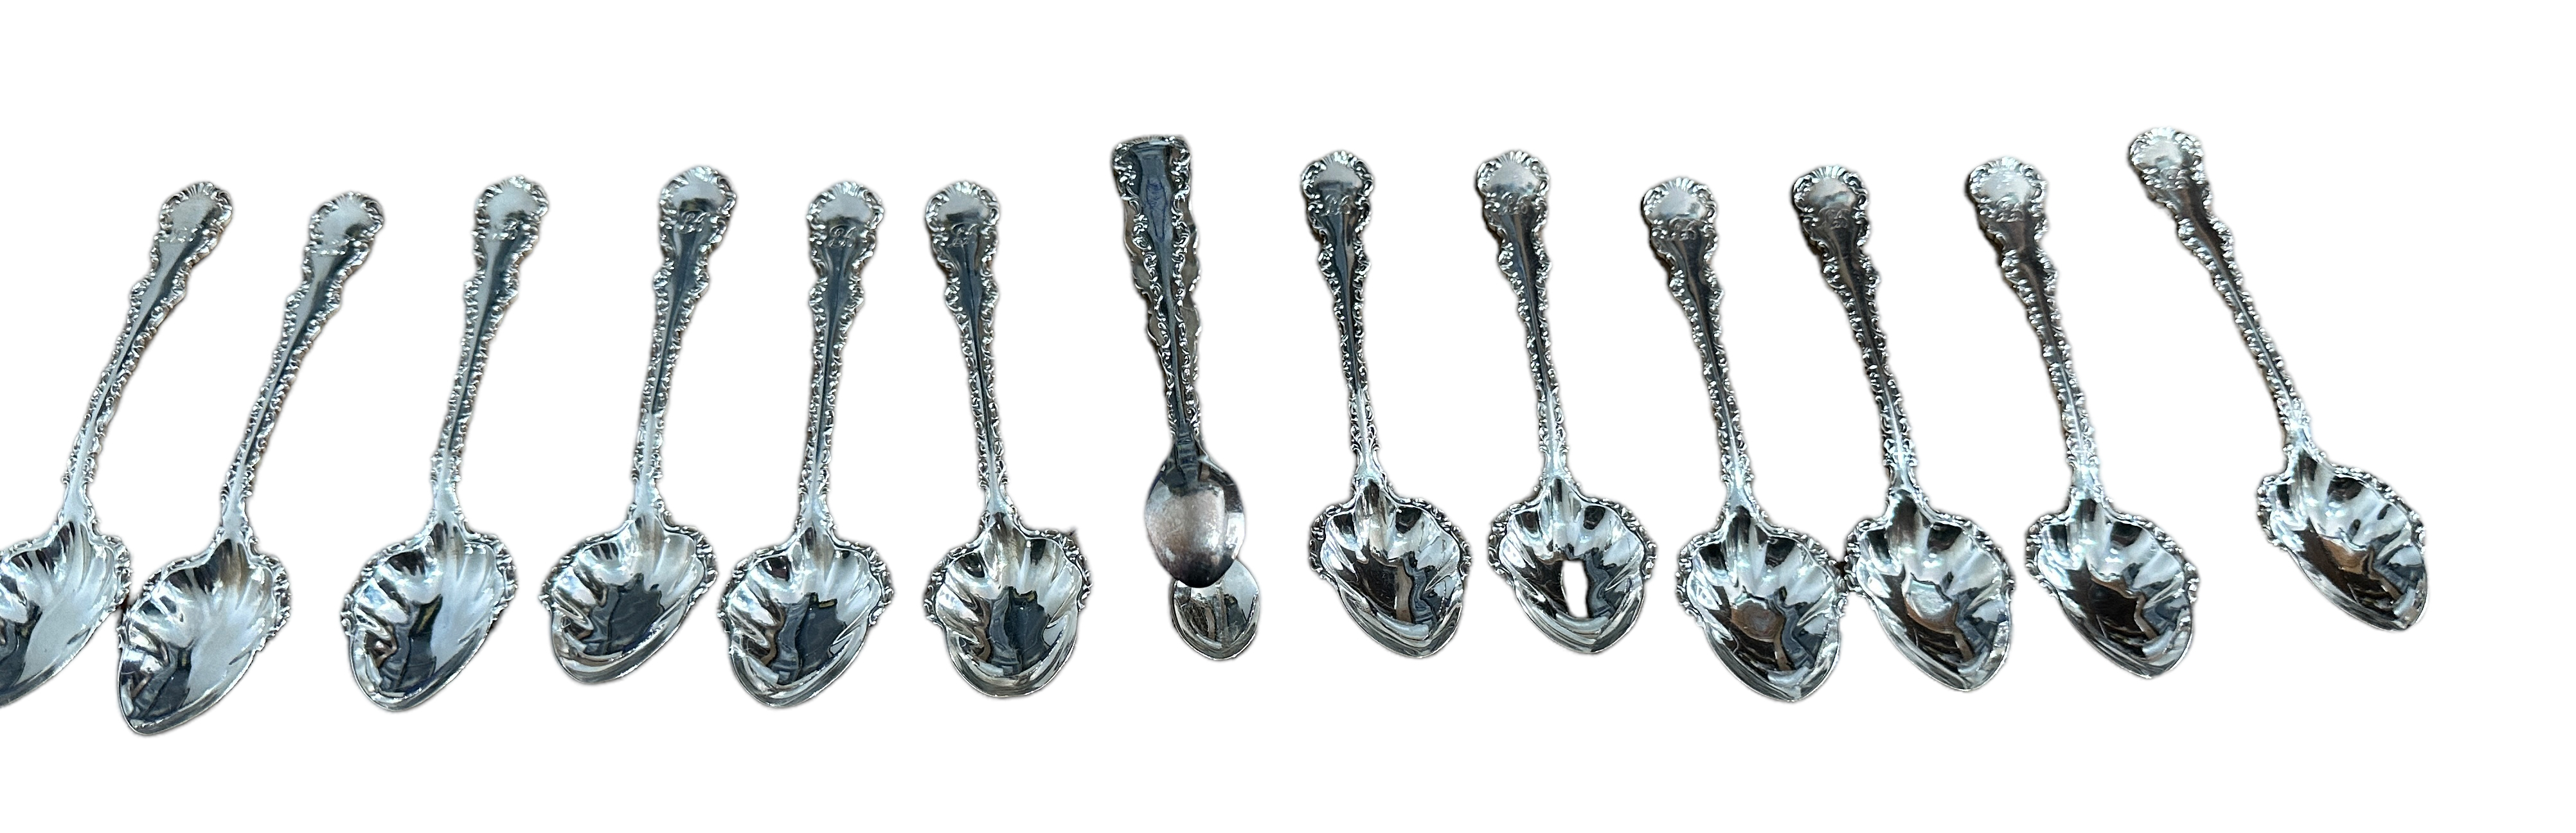 Lot of 12 Decorated Silver Spoons and Silver Tongs - Spoons 11.8 cm long.